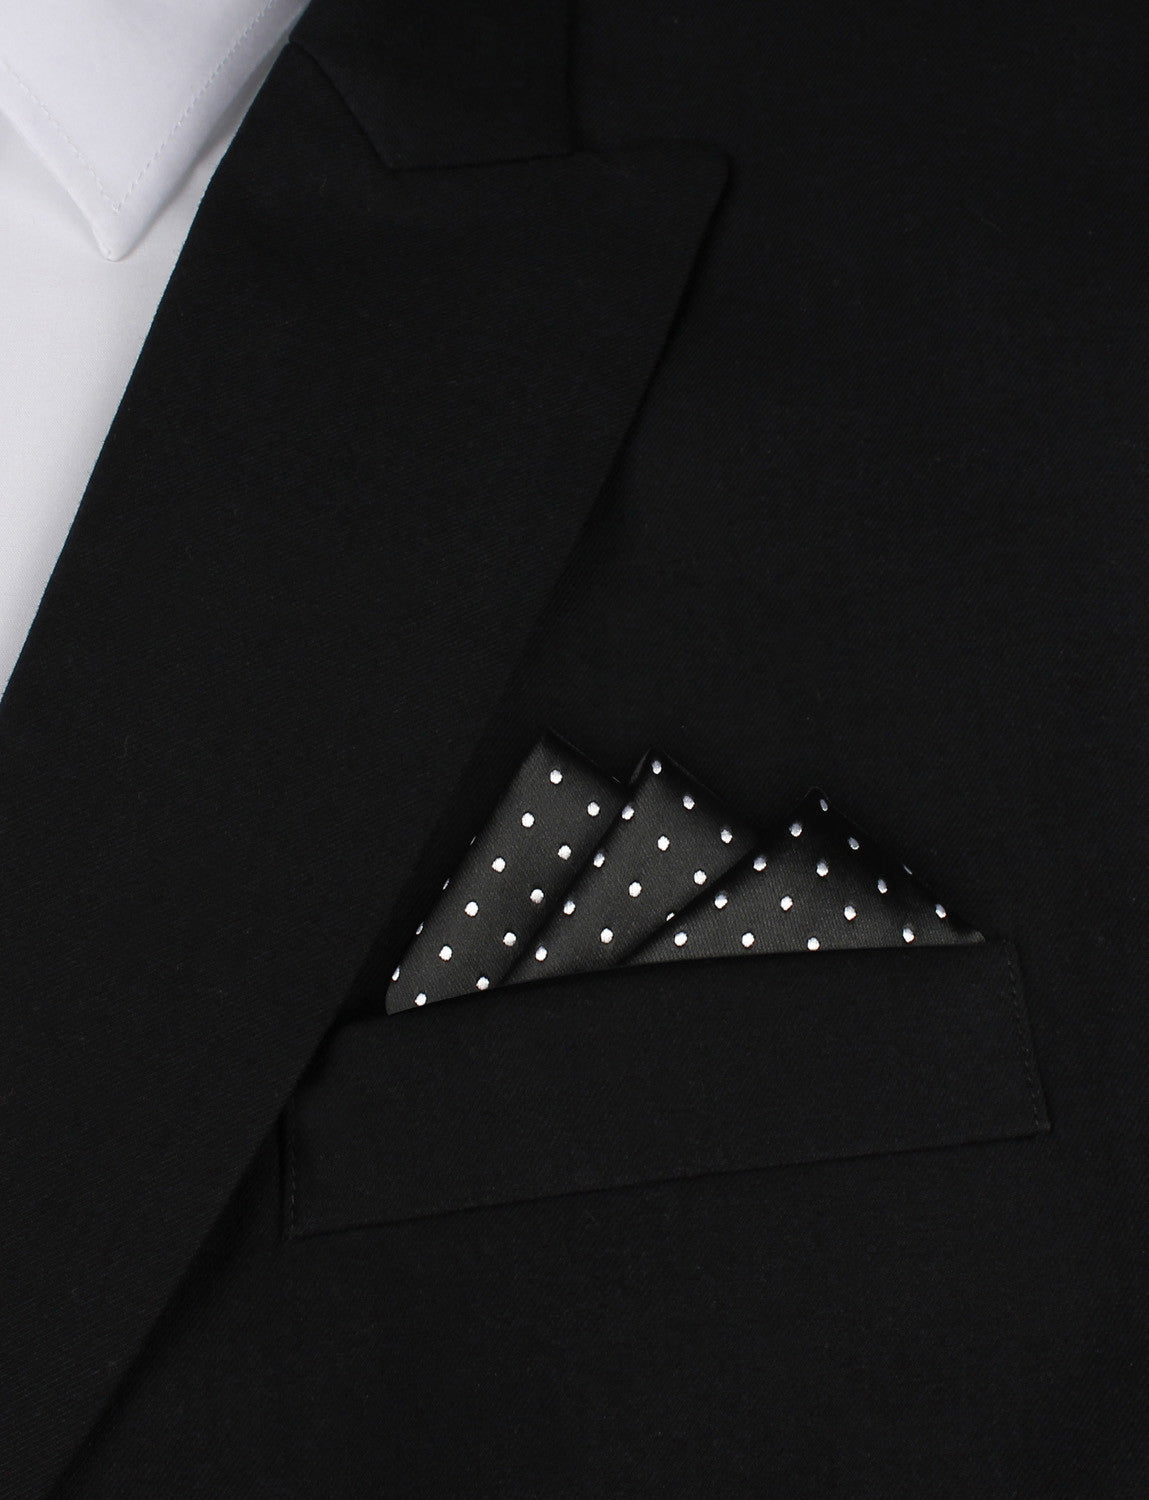 Black with Small White Polka Dots - Oxygen Three Point Pocket Square Fold